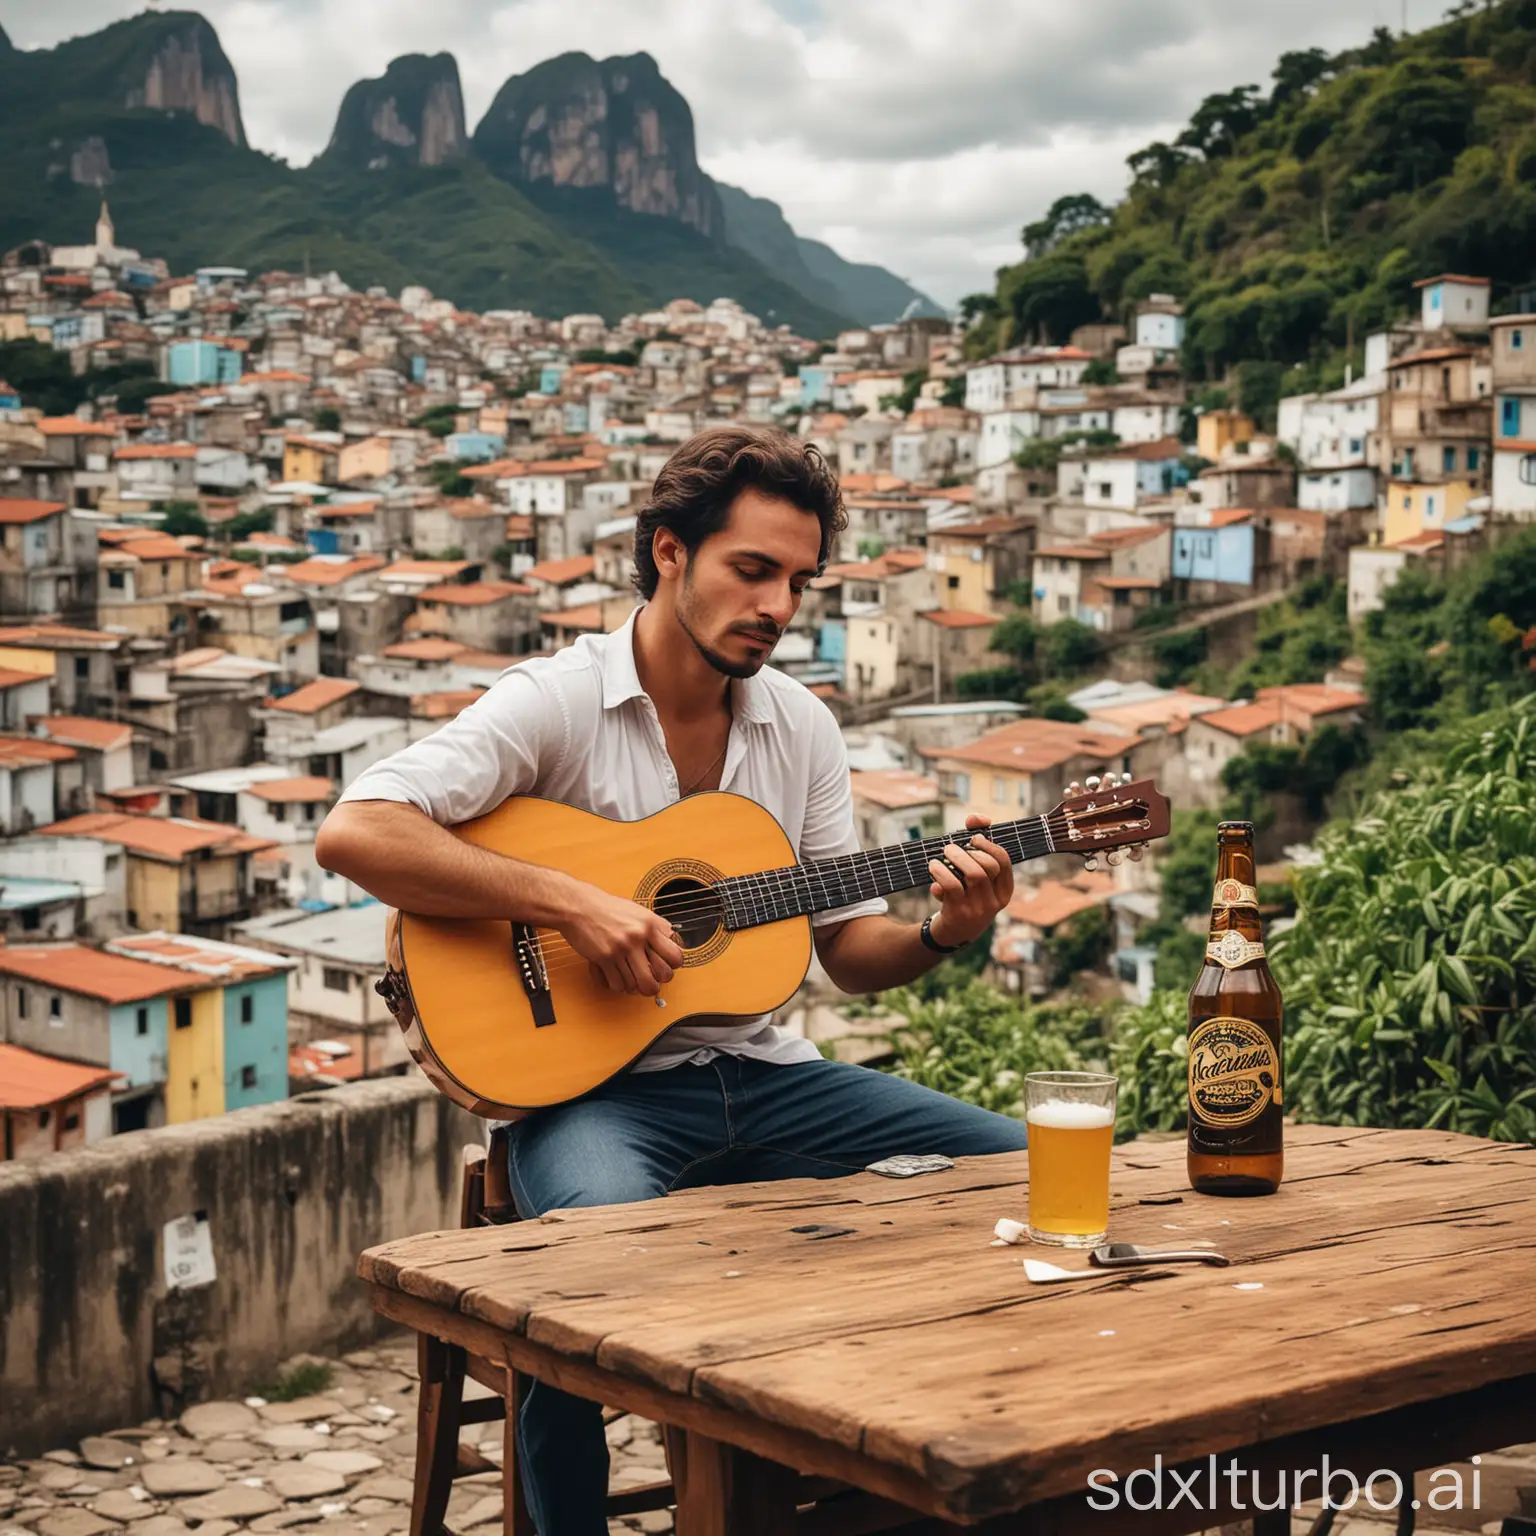 a poor guy playing samba on an Spanish guitar, an empty bottle of beer over the table, on the middle of a favela of Rio de Janeiro, poverty, Corcovado on the background